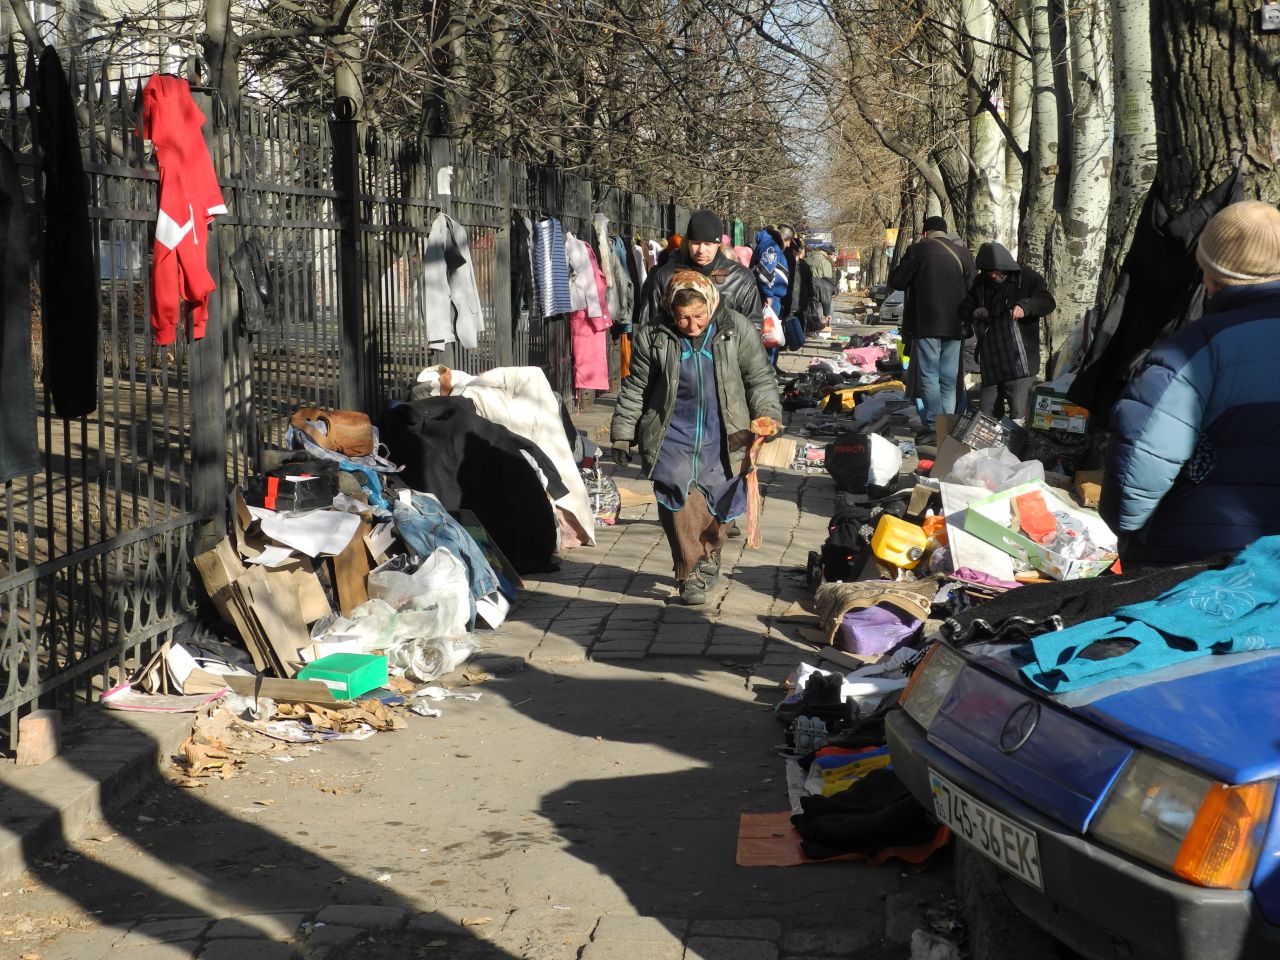 Donetsk was once a prosperous city, but now many of those who remain are struggling to find the money to buy bread -- some have been forced to try and sell their few meager belongings to make ends meet.